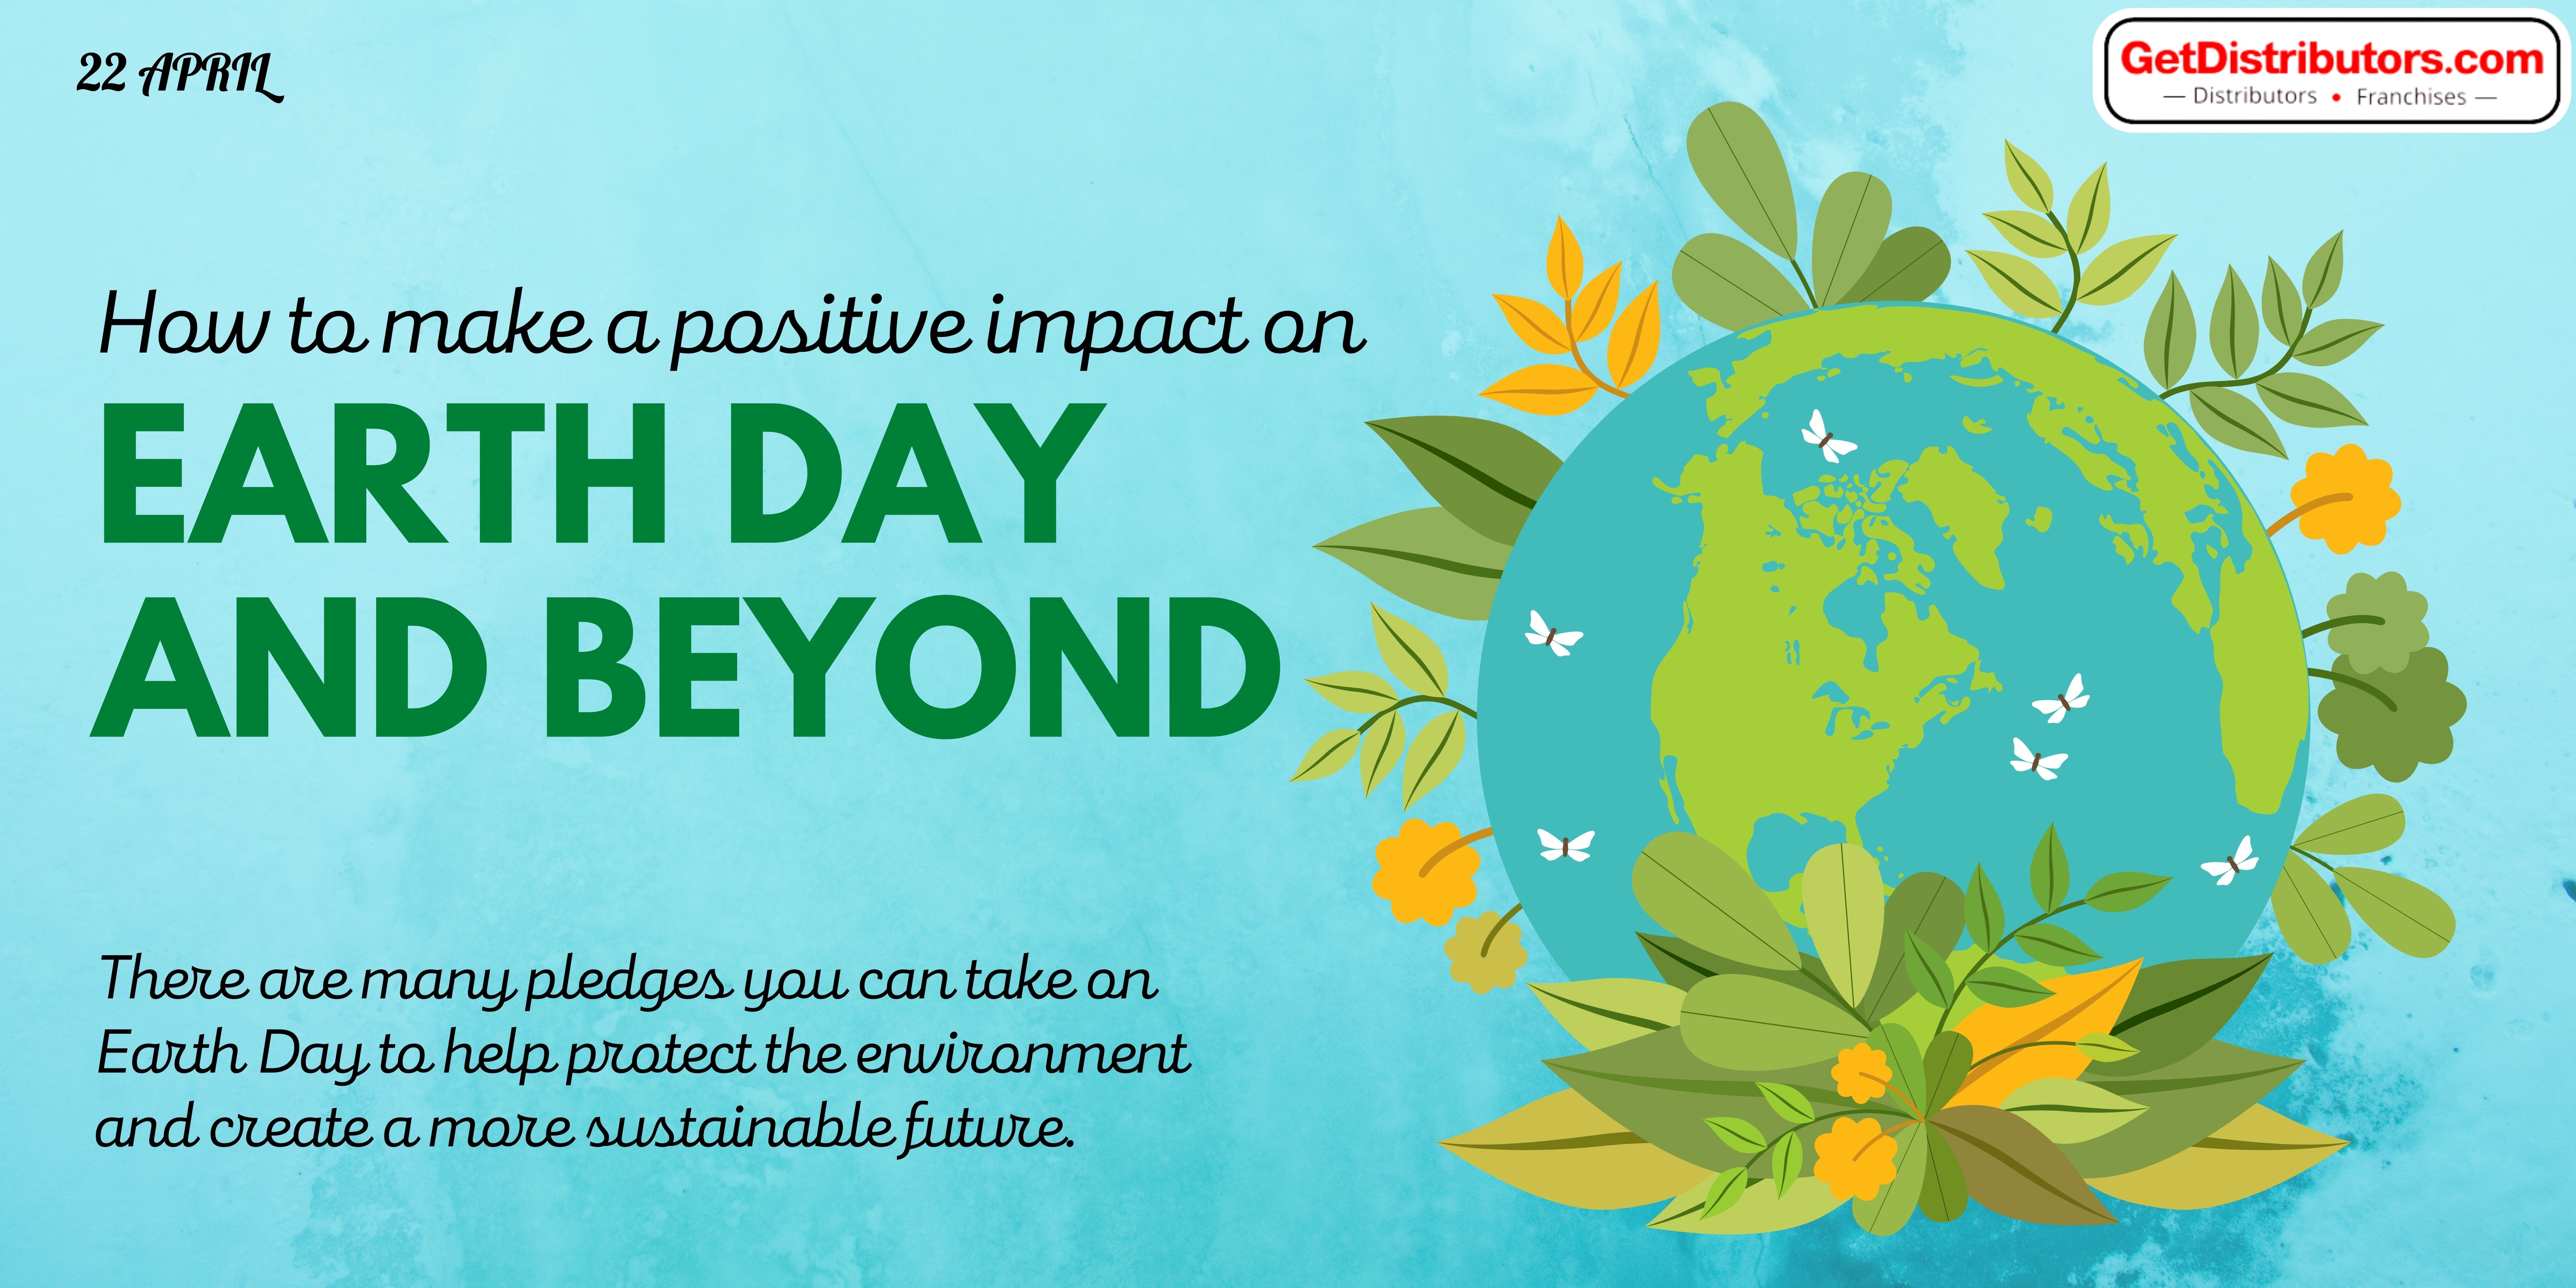 How To Make A Positive Impact On Earth Day And Beyond